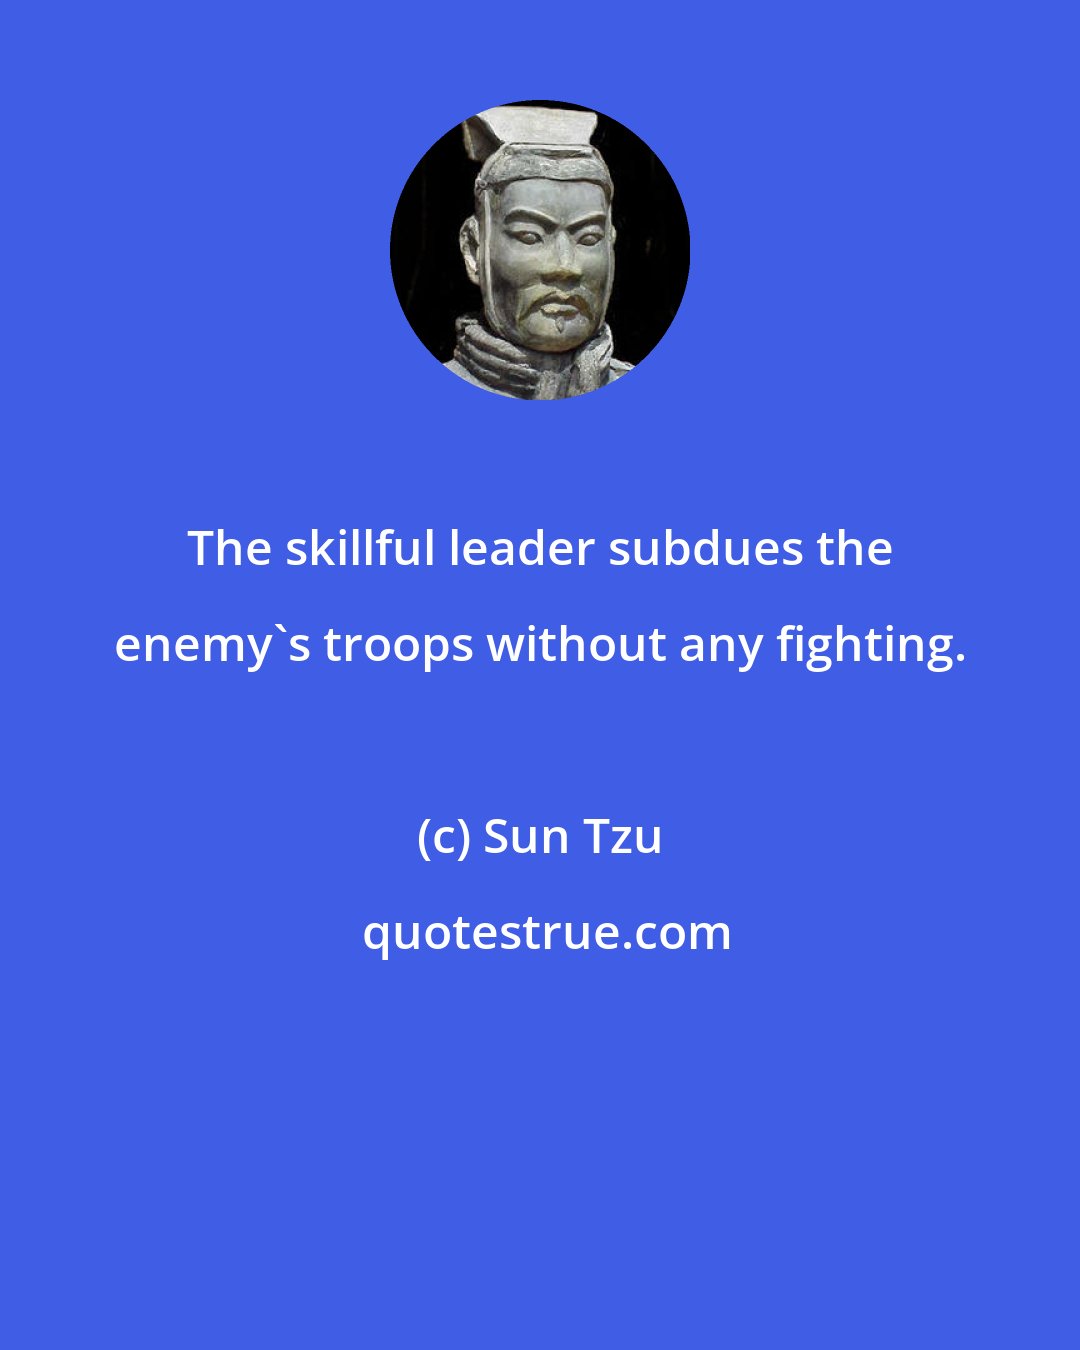 Sun Tzu: The skillful leader subdues the enemy's troops without any fighting.